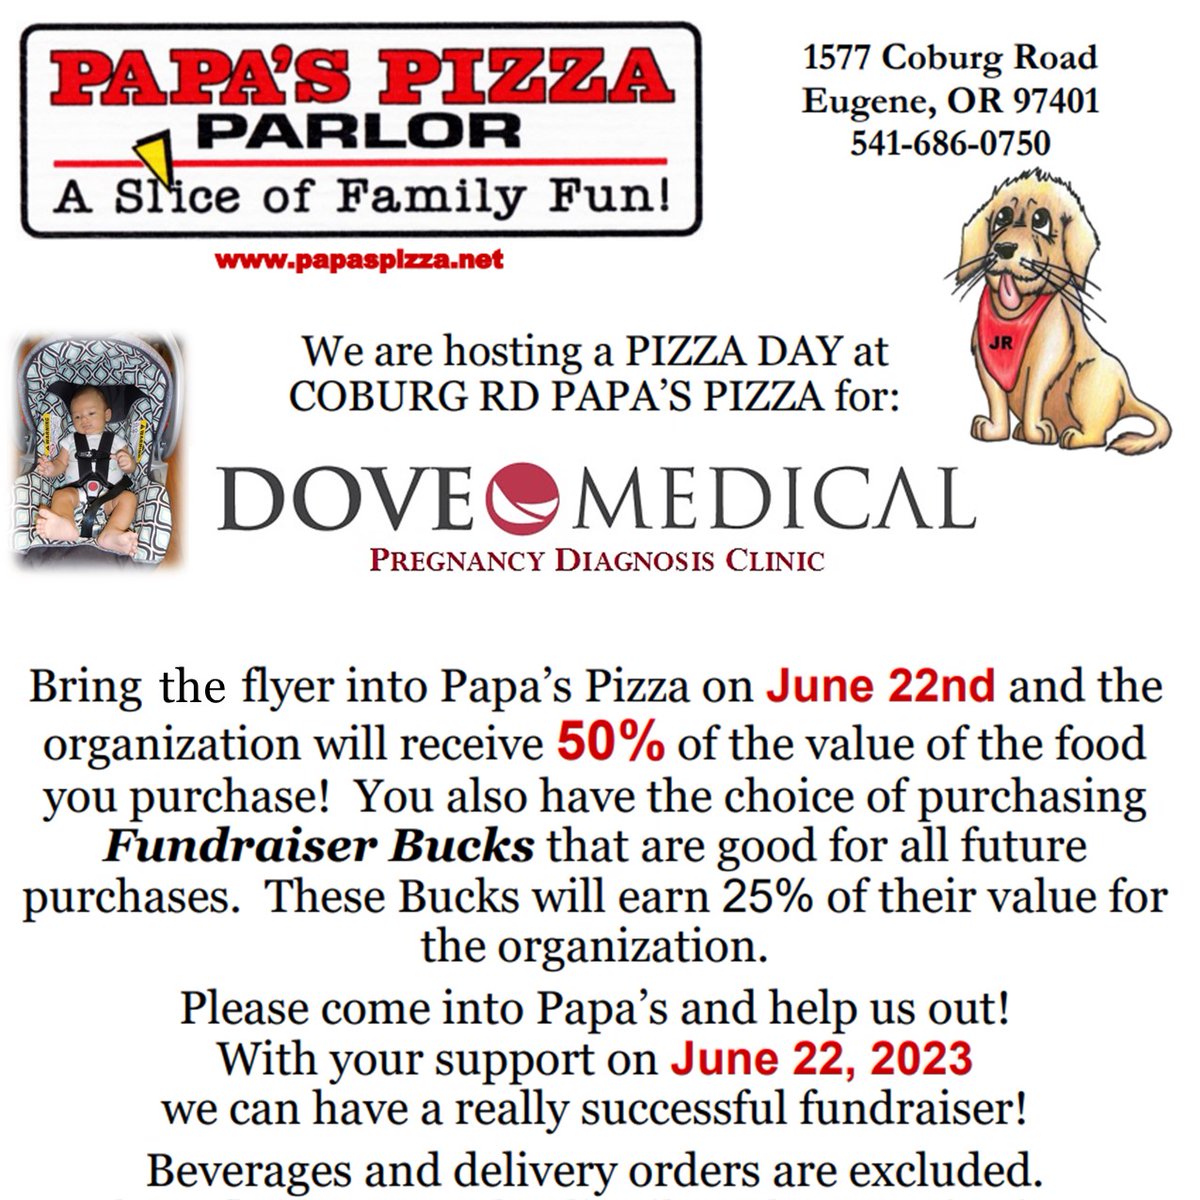 You can help Dove Medical raise funds for infant car seats given to our patients who participate in our prenatal class. 50% of your Papa's Pizza food purchase will go to Dove Medical on June 22. #pizzaday #carseats #pregnancydiagnosisclinic